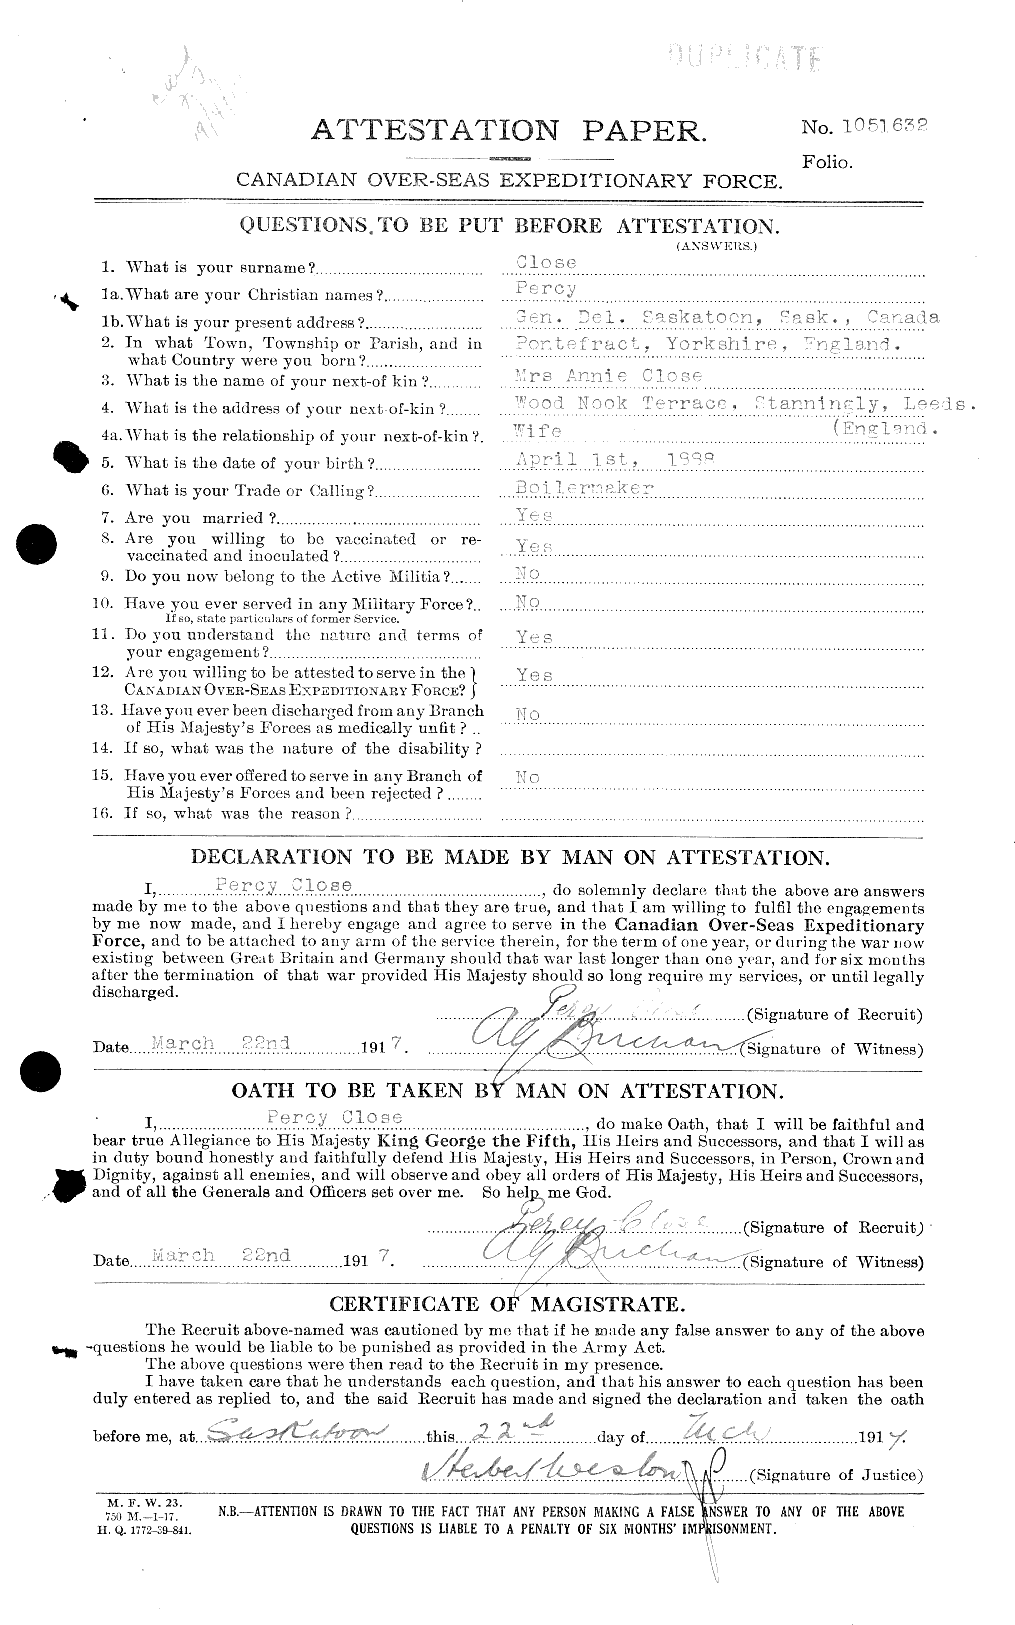 Personnel Records of the First World War - CEF 025926a